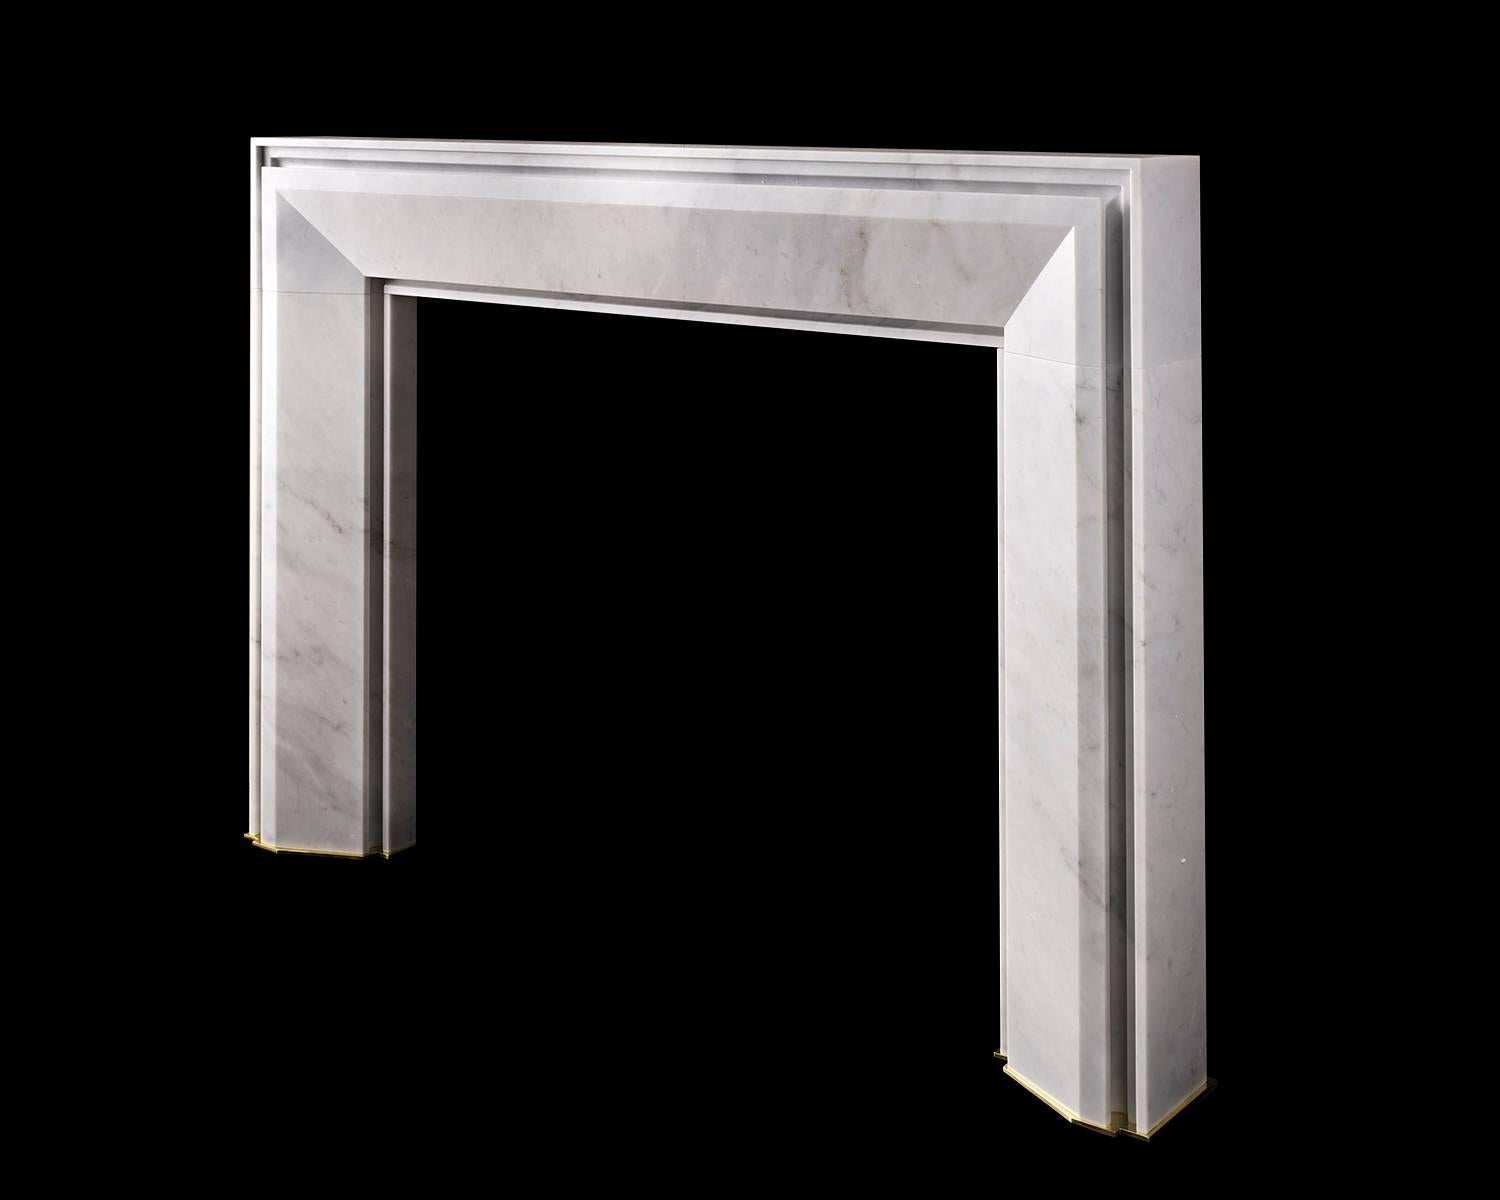 The Monroe designed by Pembroke & Ives for Chesney's. This tapering frame design springs out from a deep circular undercut detail creating a strong visual appearance. Hand carved in Carrara Marble with brass base plates.  

Opening dimensions:46